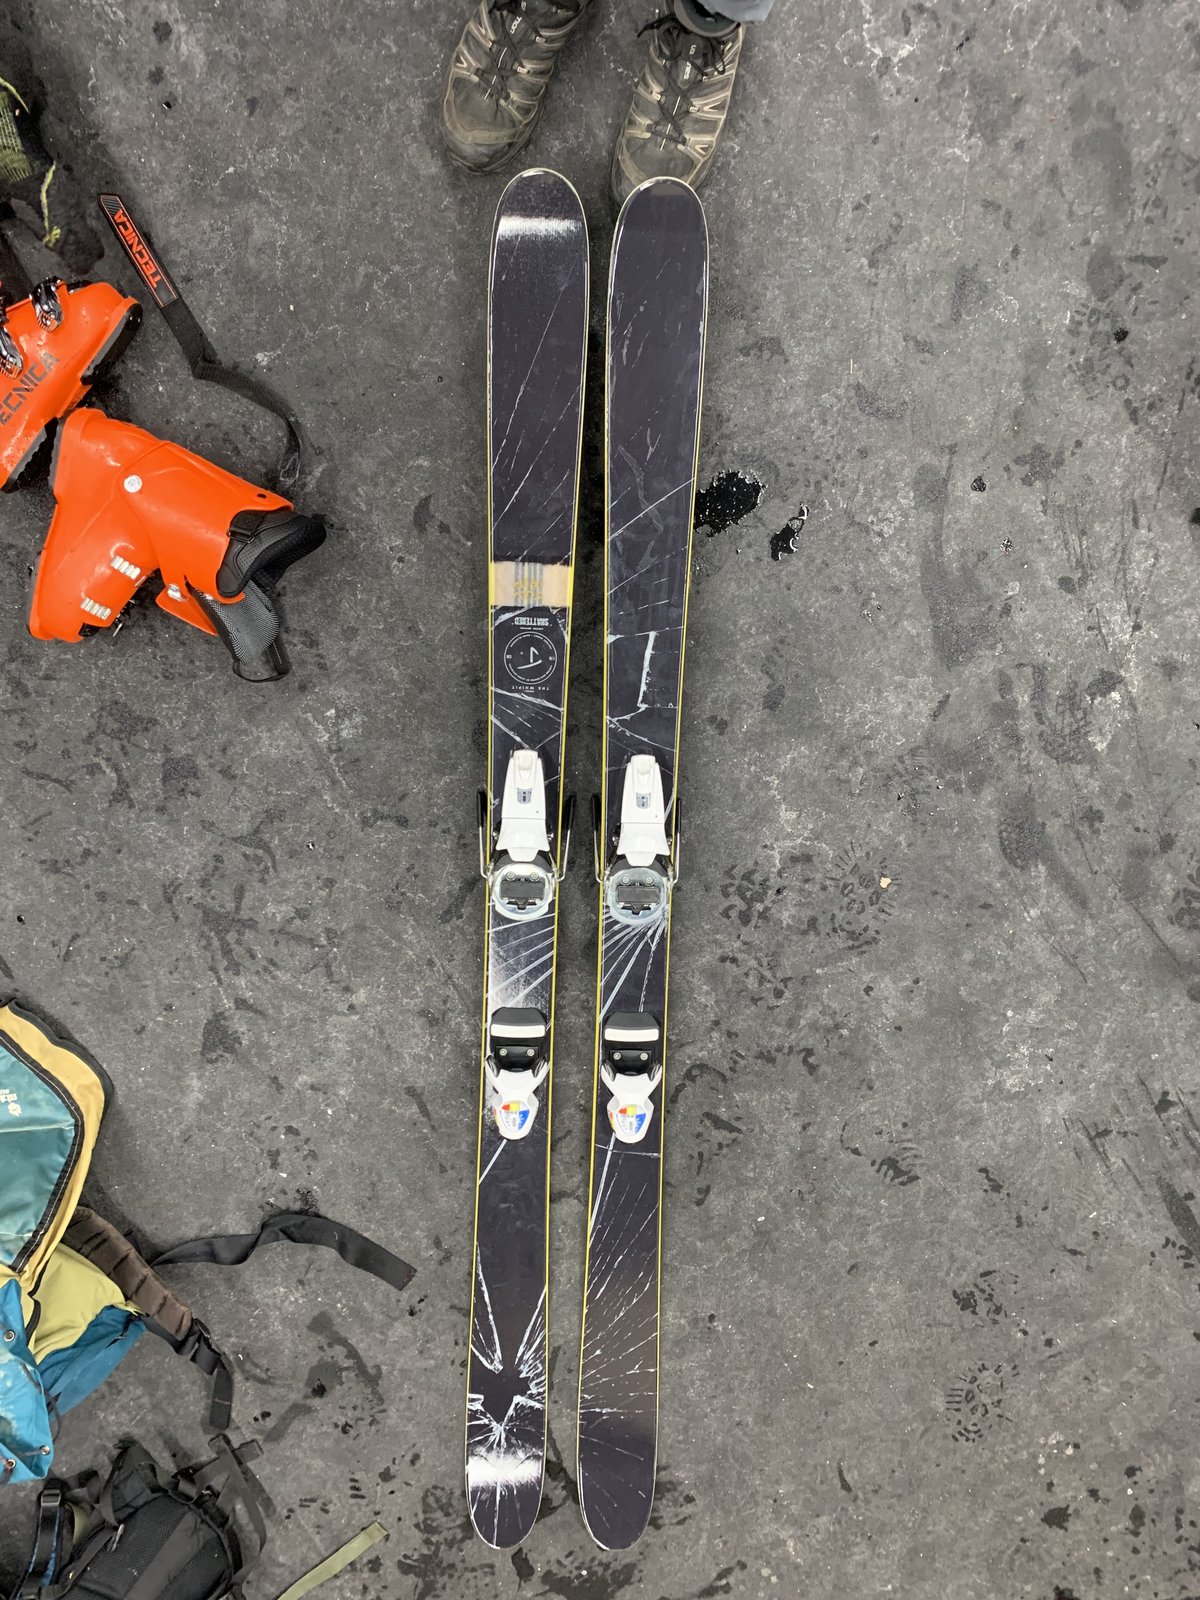 J Skis Whip It “Shattered” Graphic with Look Pivot 18s - Sell and Trade ...